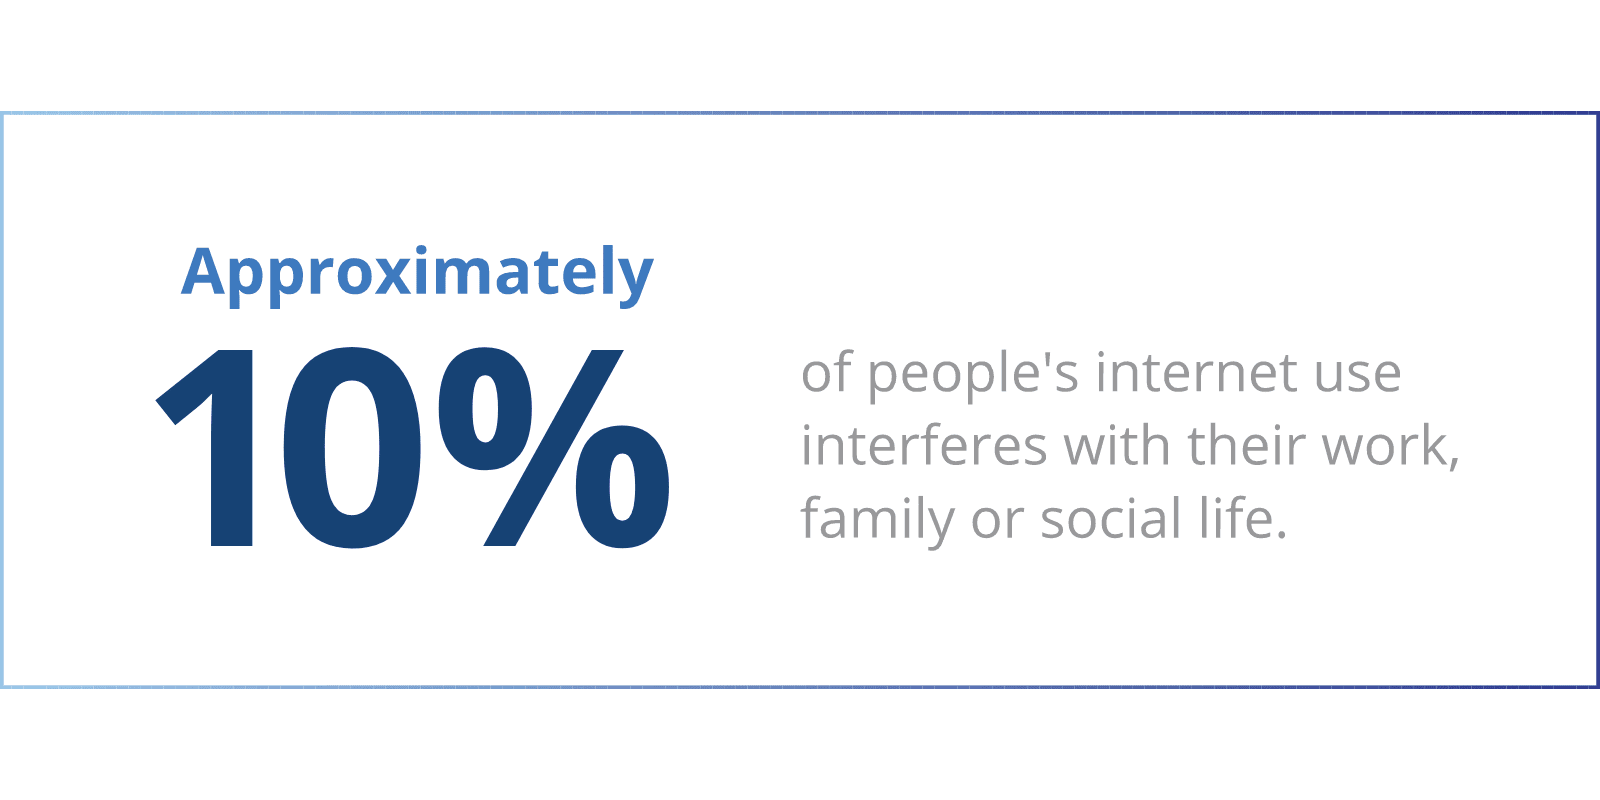 10% of people's internet use interferes with their work, family or social life